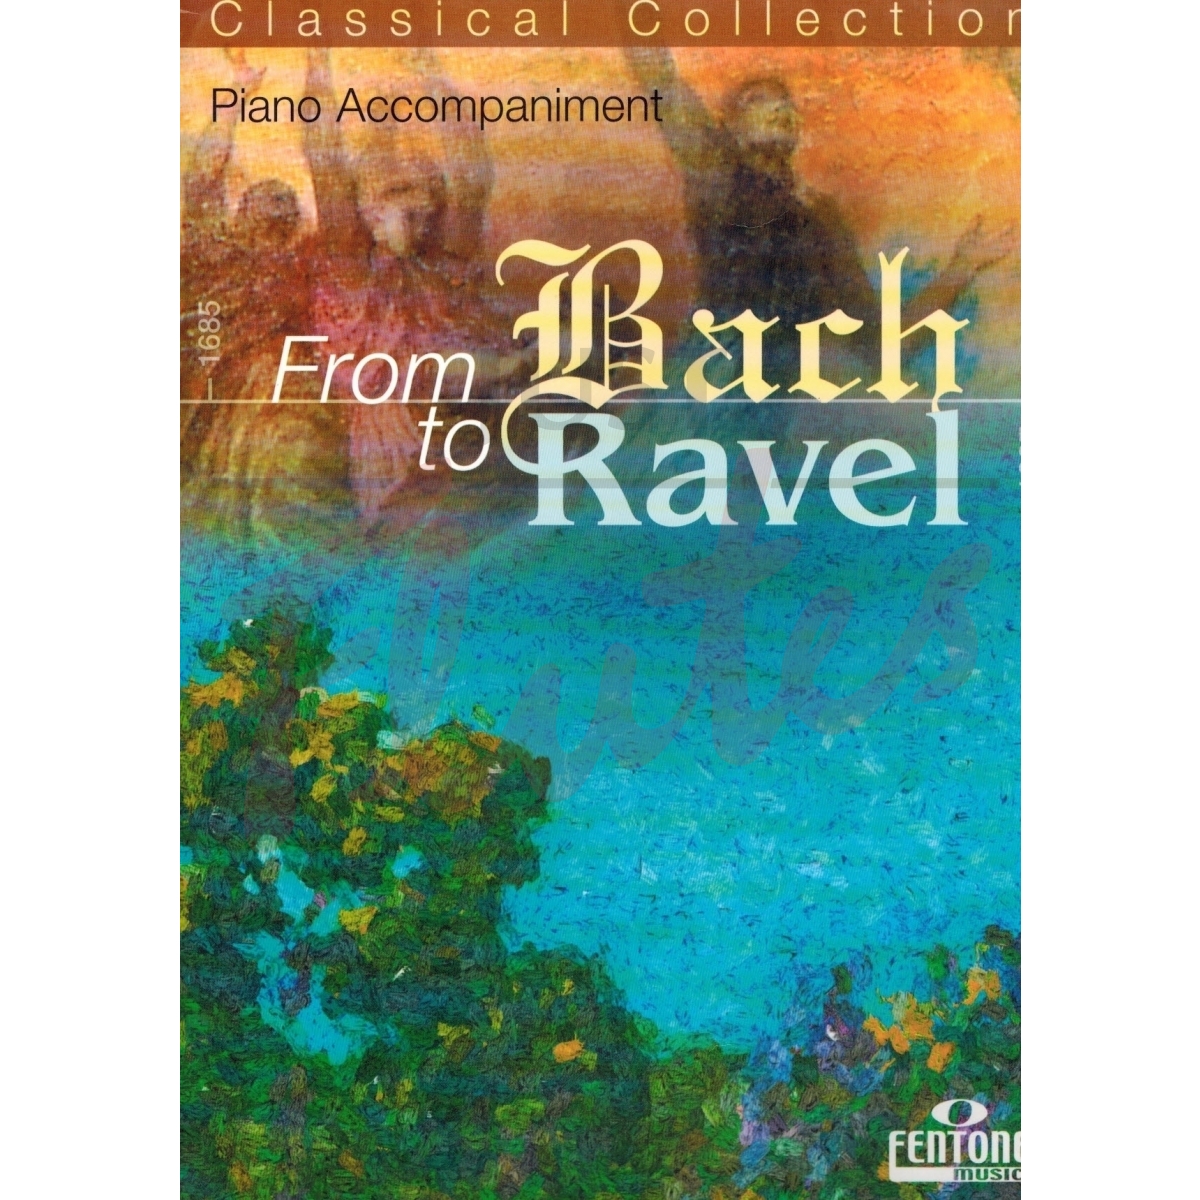 From Bach to Ravel [Piano Accompaniment Book]